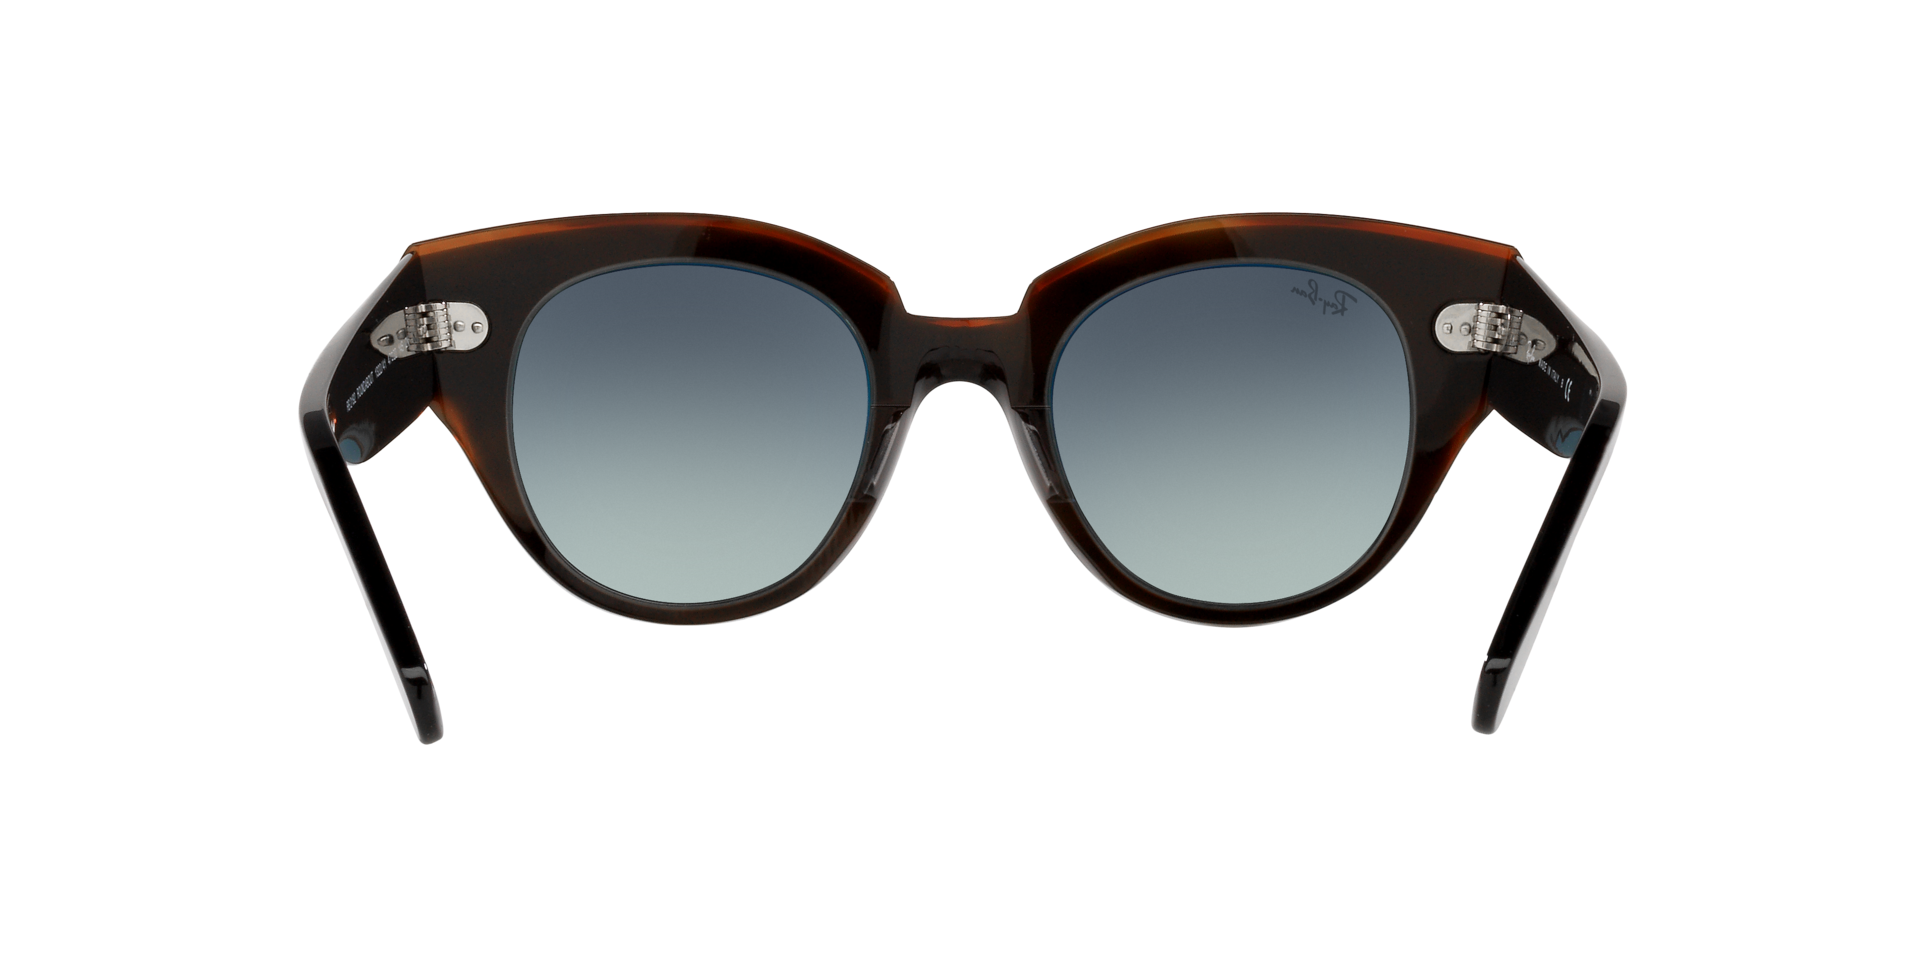 Buy Ray-Ban Roundabout Sunglasses Online.